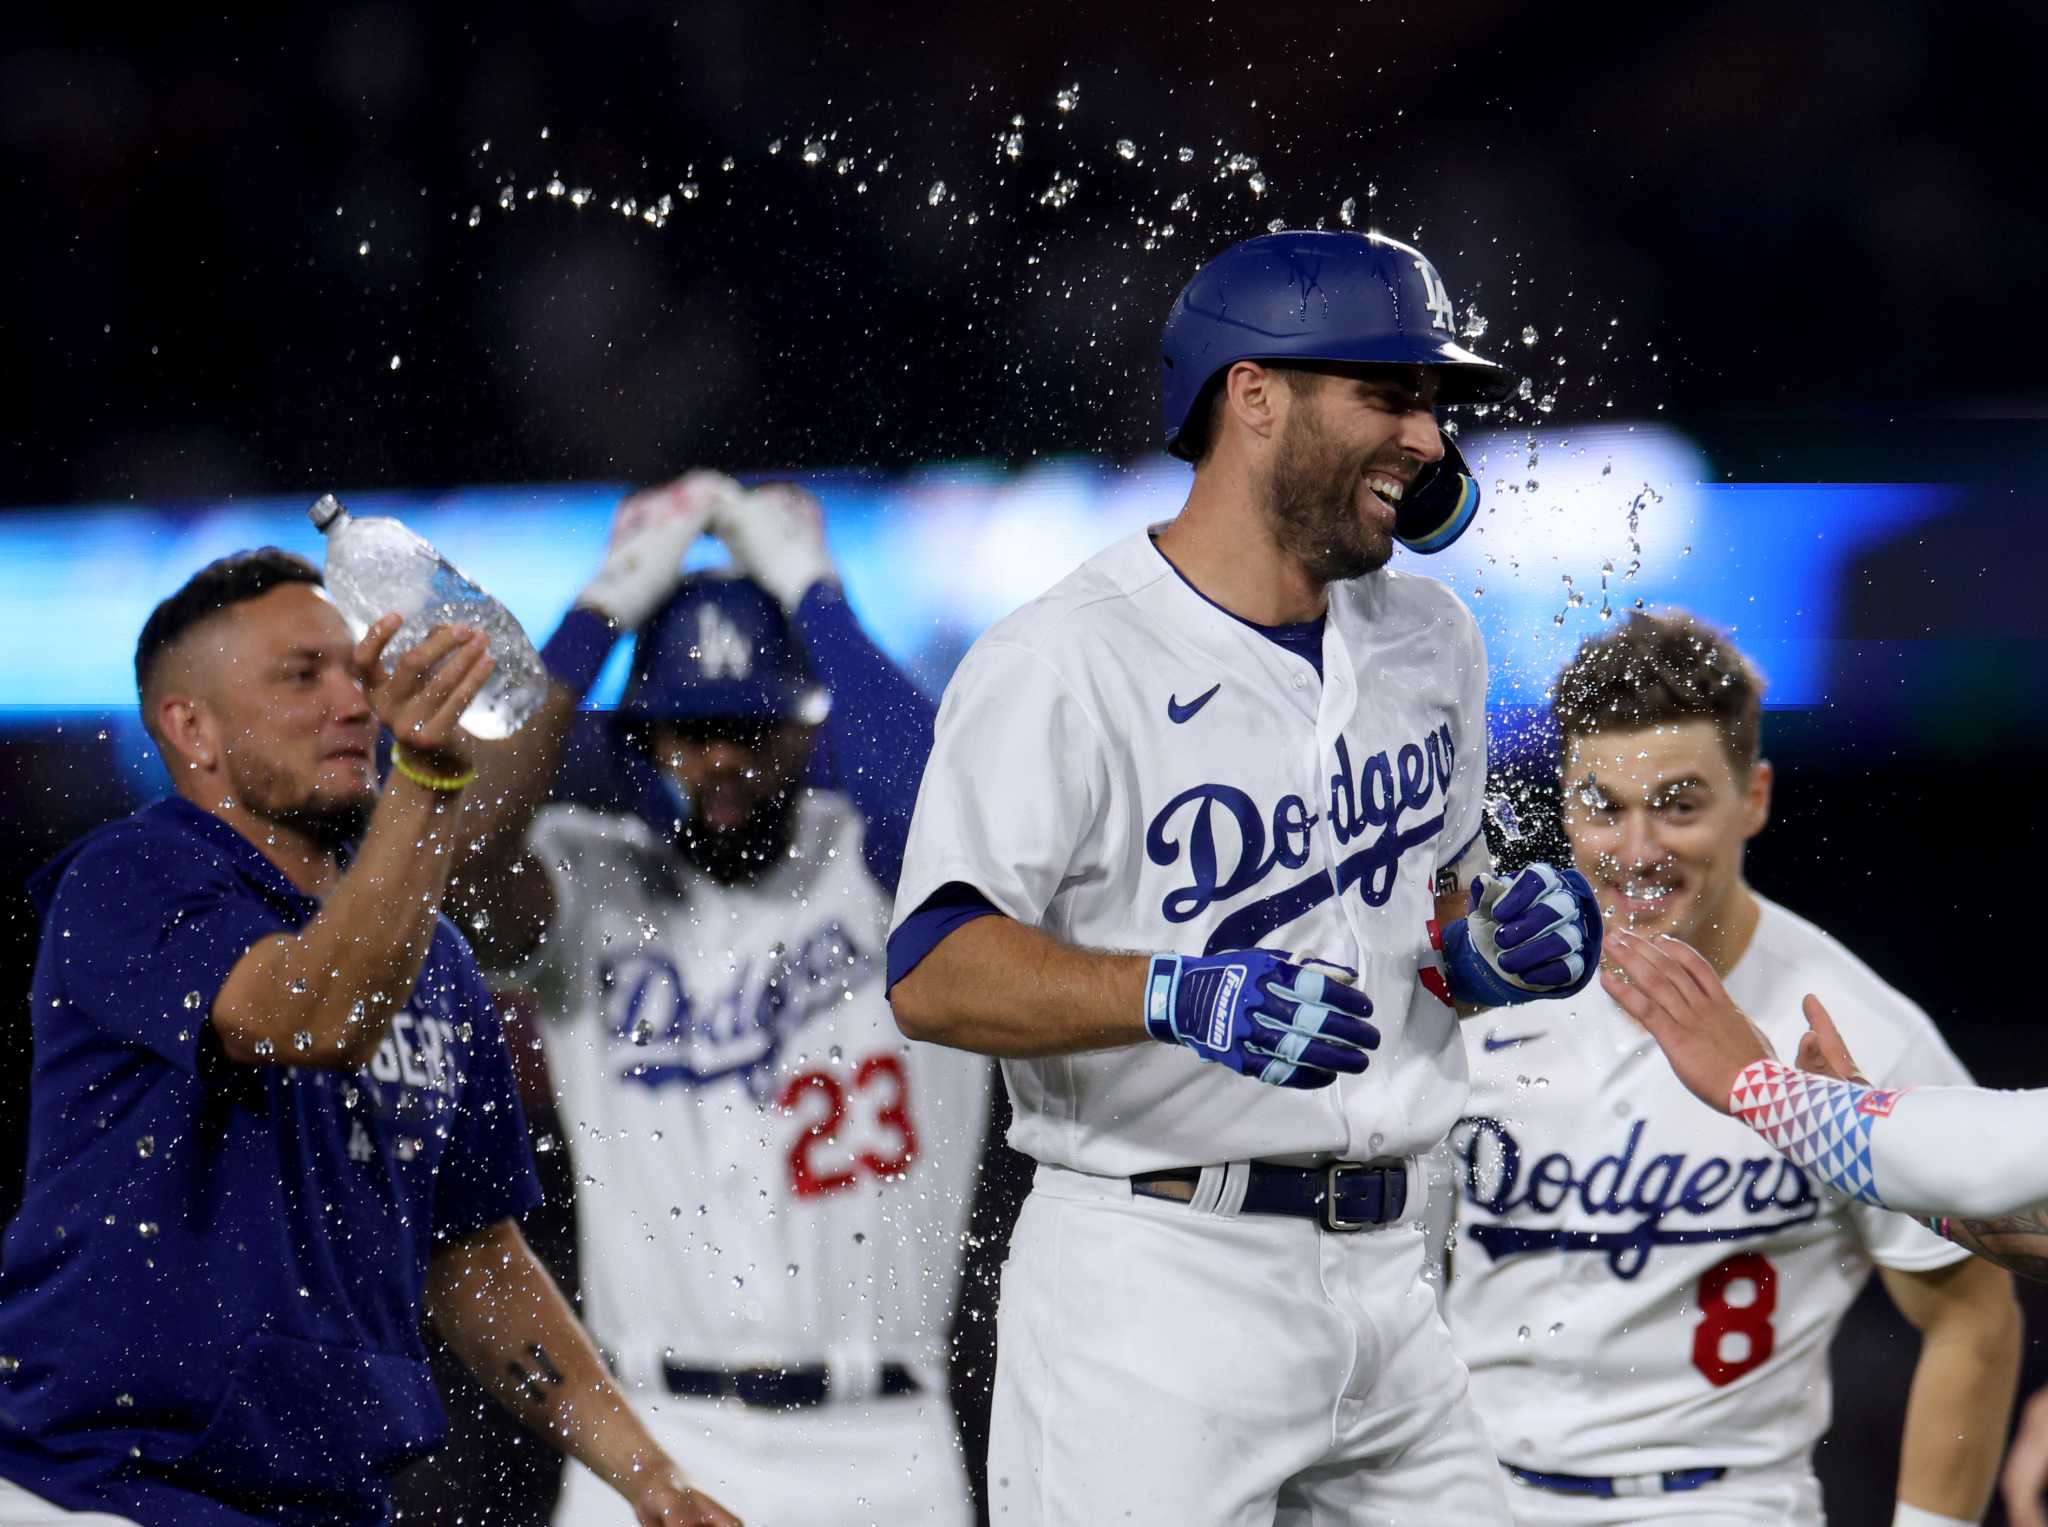 Dodgers celebration included another team after Wild Card win